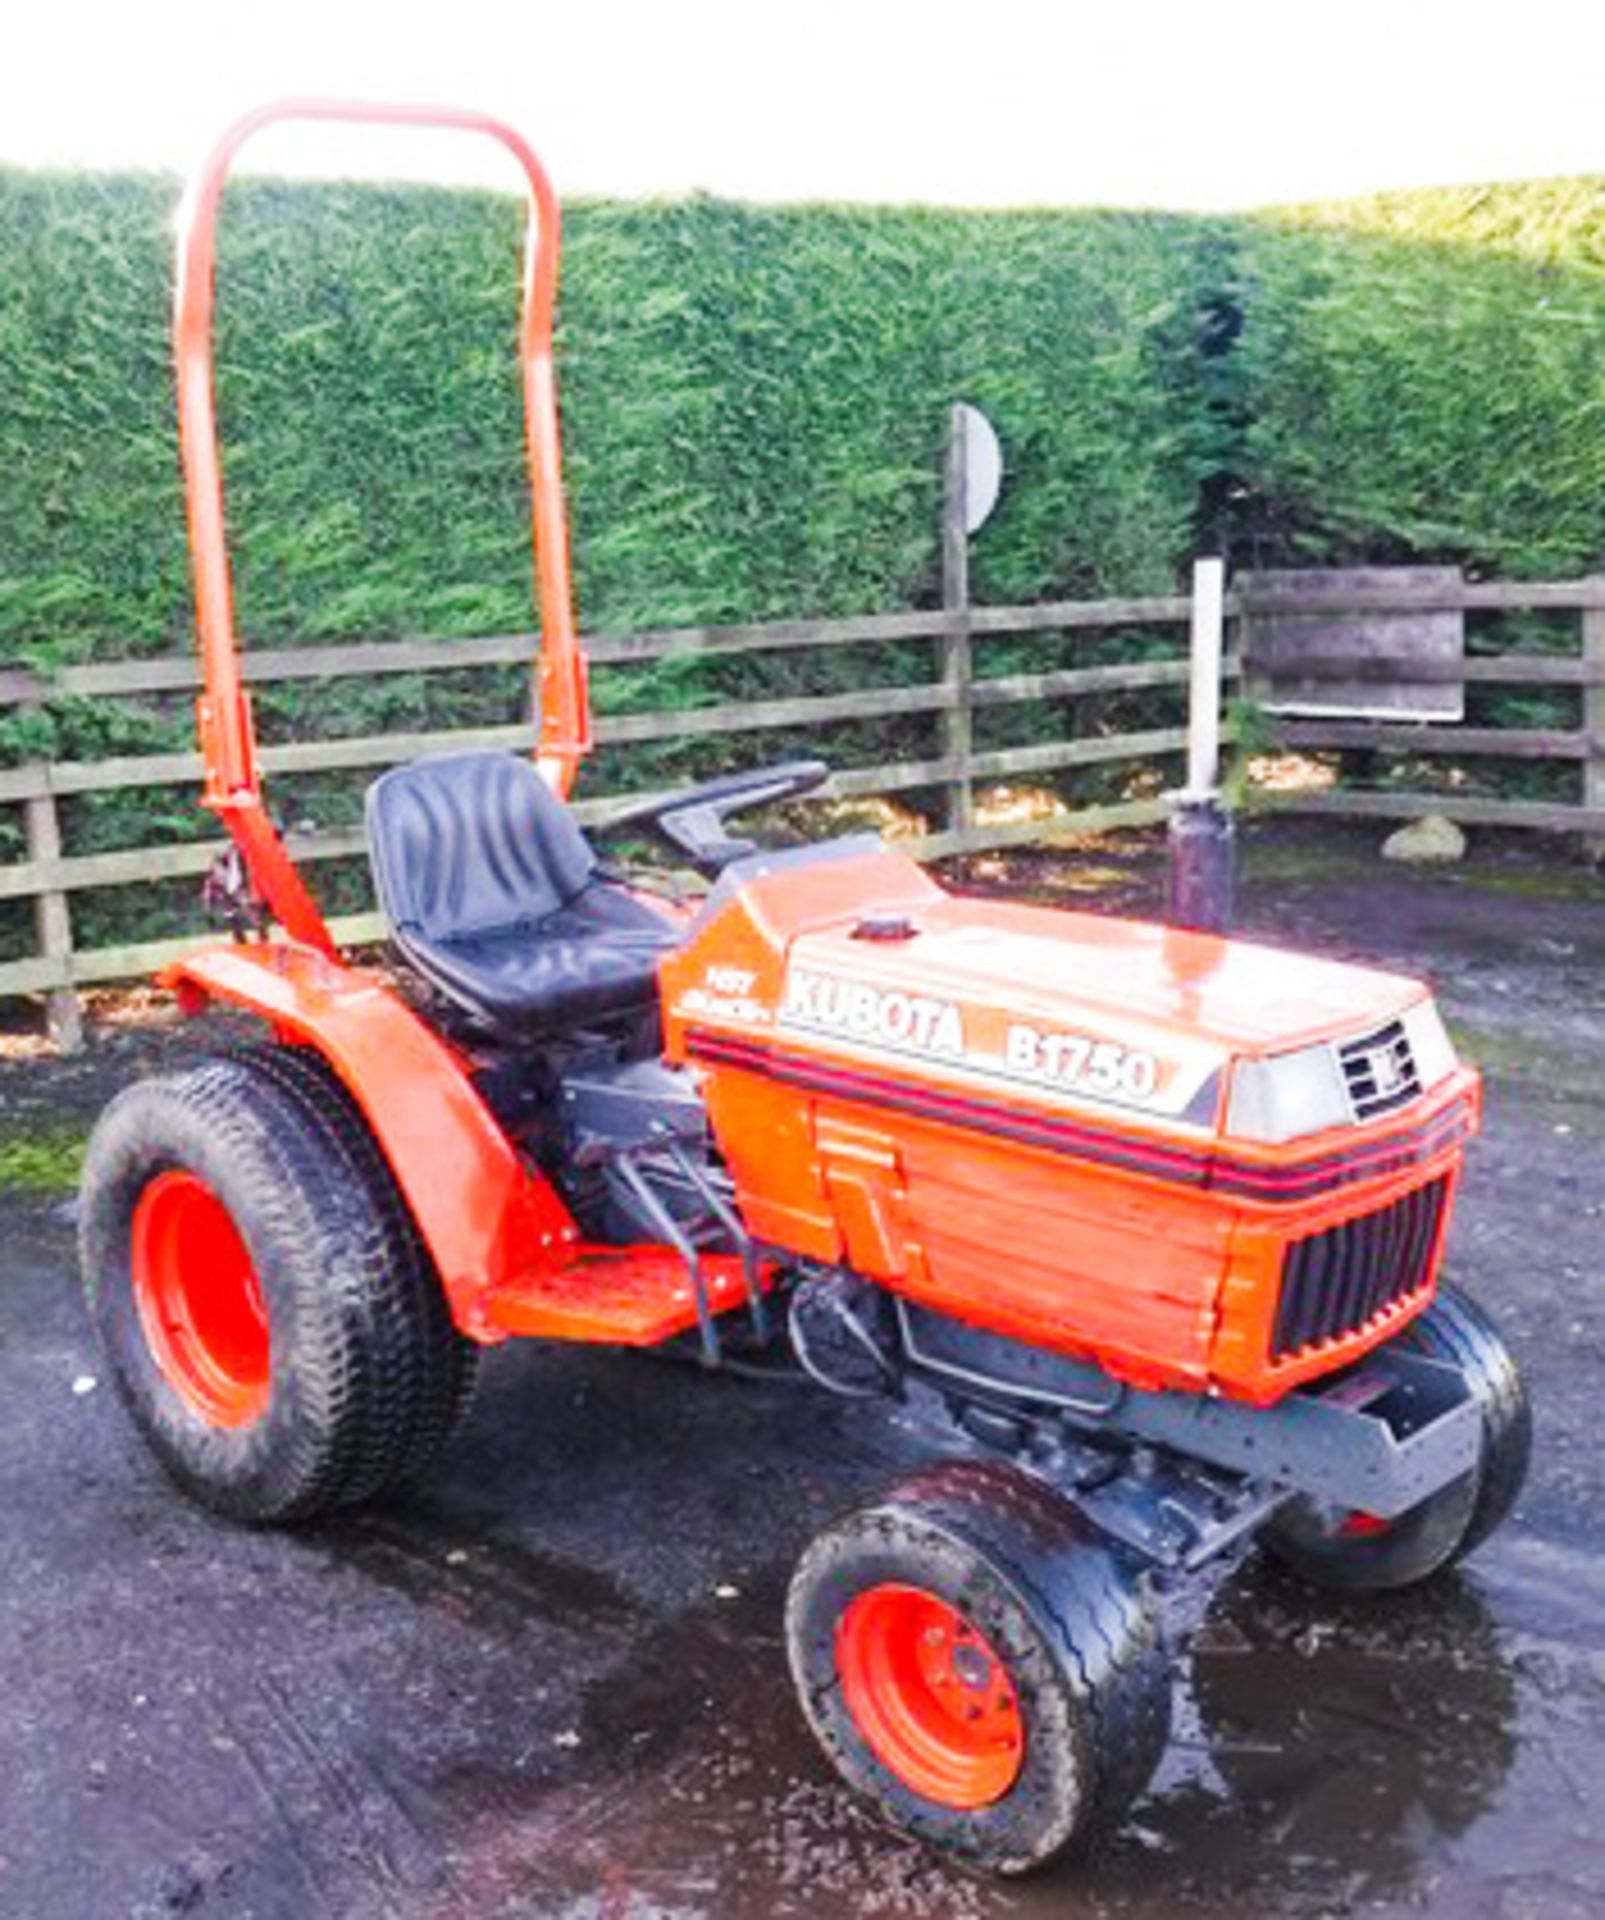 1998 (APPROX) B1750 TRACTOR SN 65435. 20HP 4 WHEEL DRIVE TURF TYRES PTO AND 3 POINT LINKAGE. 665 H